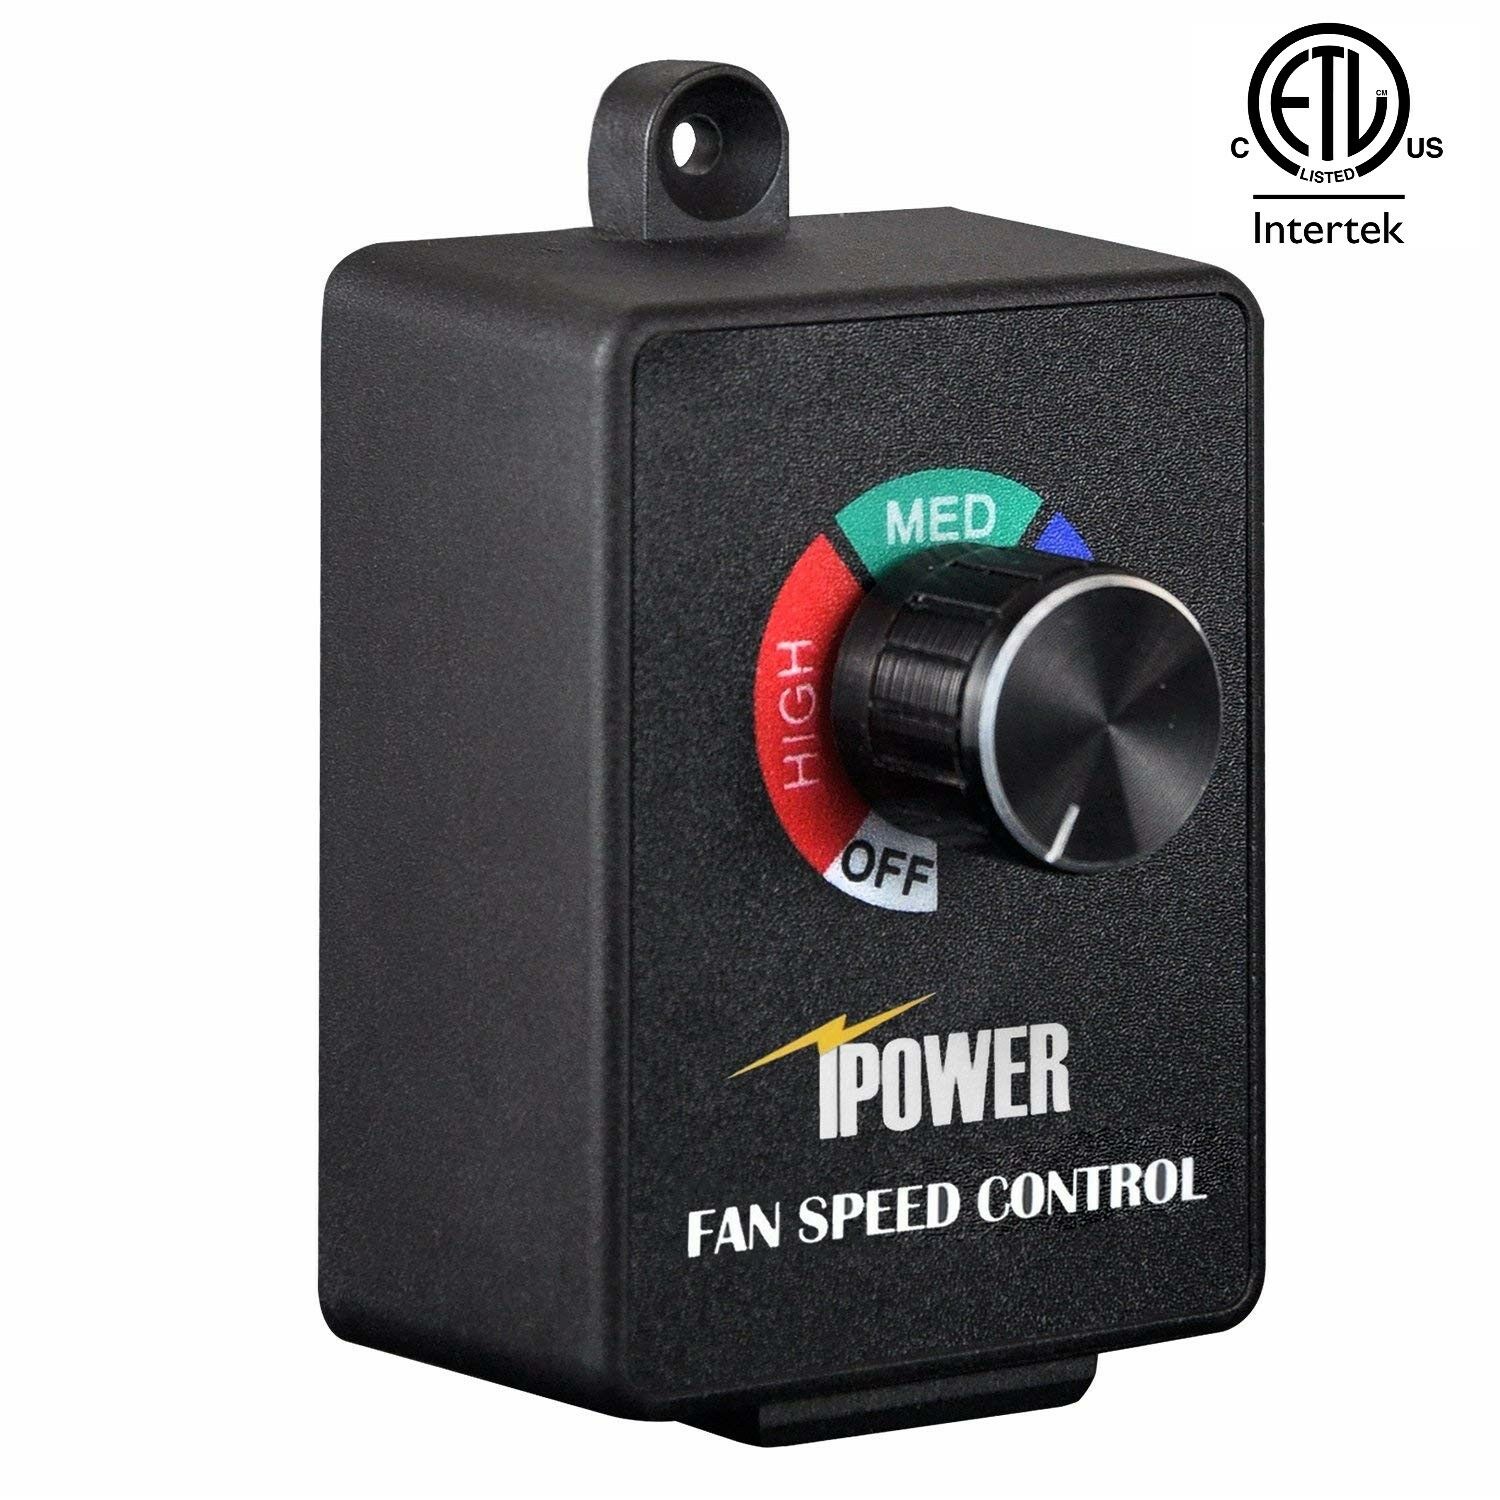 iPower Exhaust Speed Adjuster for Duct Inline Fan Vent Blower HVAC Controls 350W